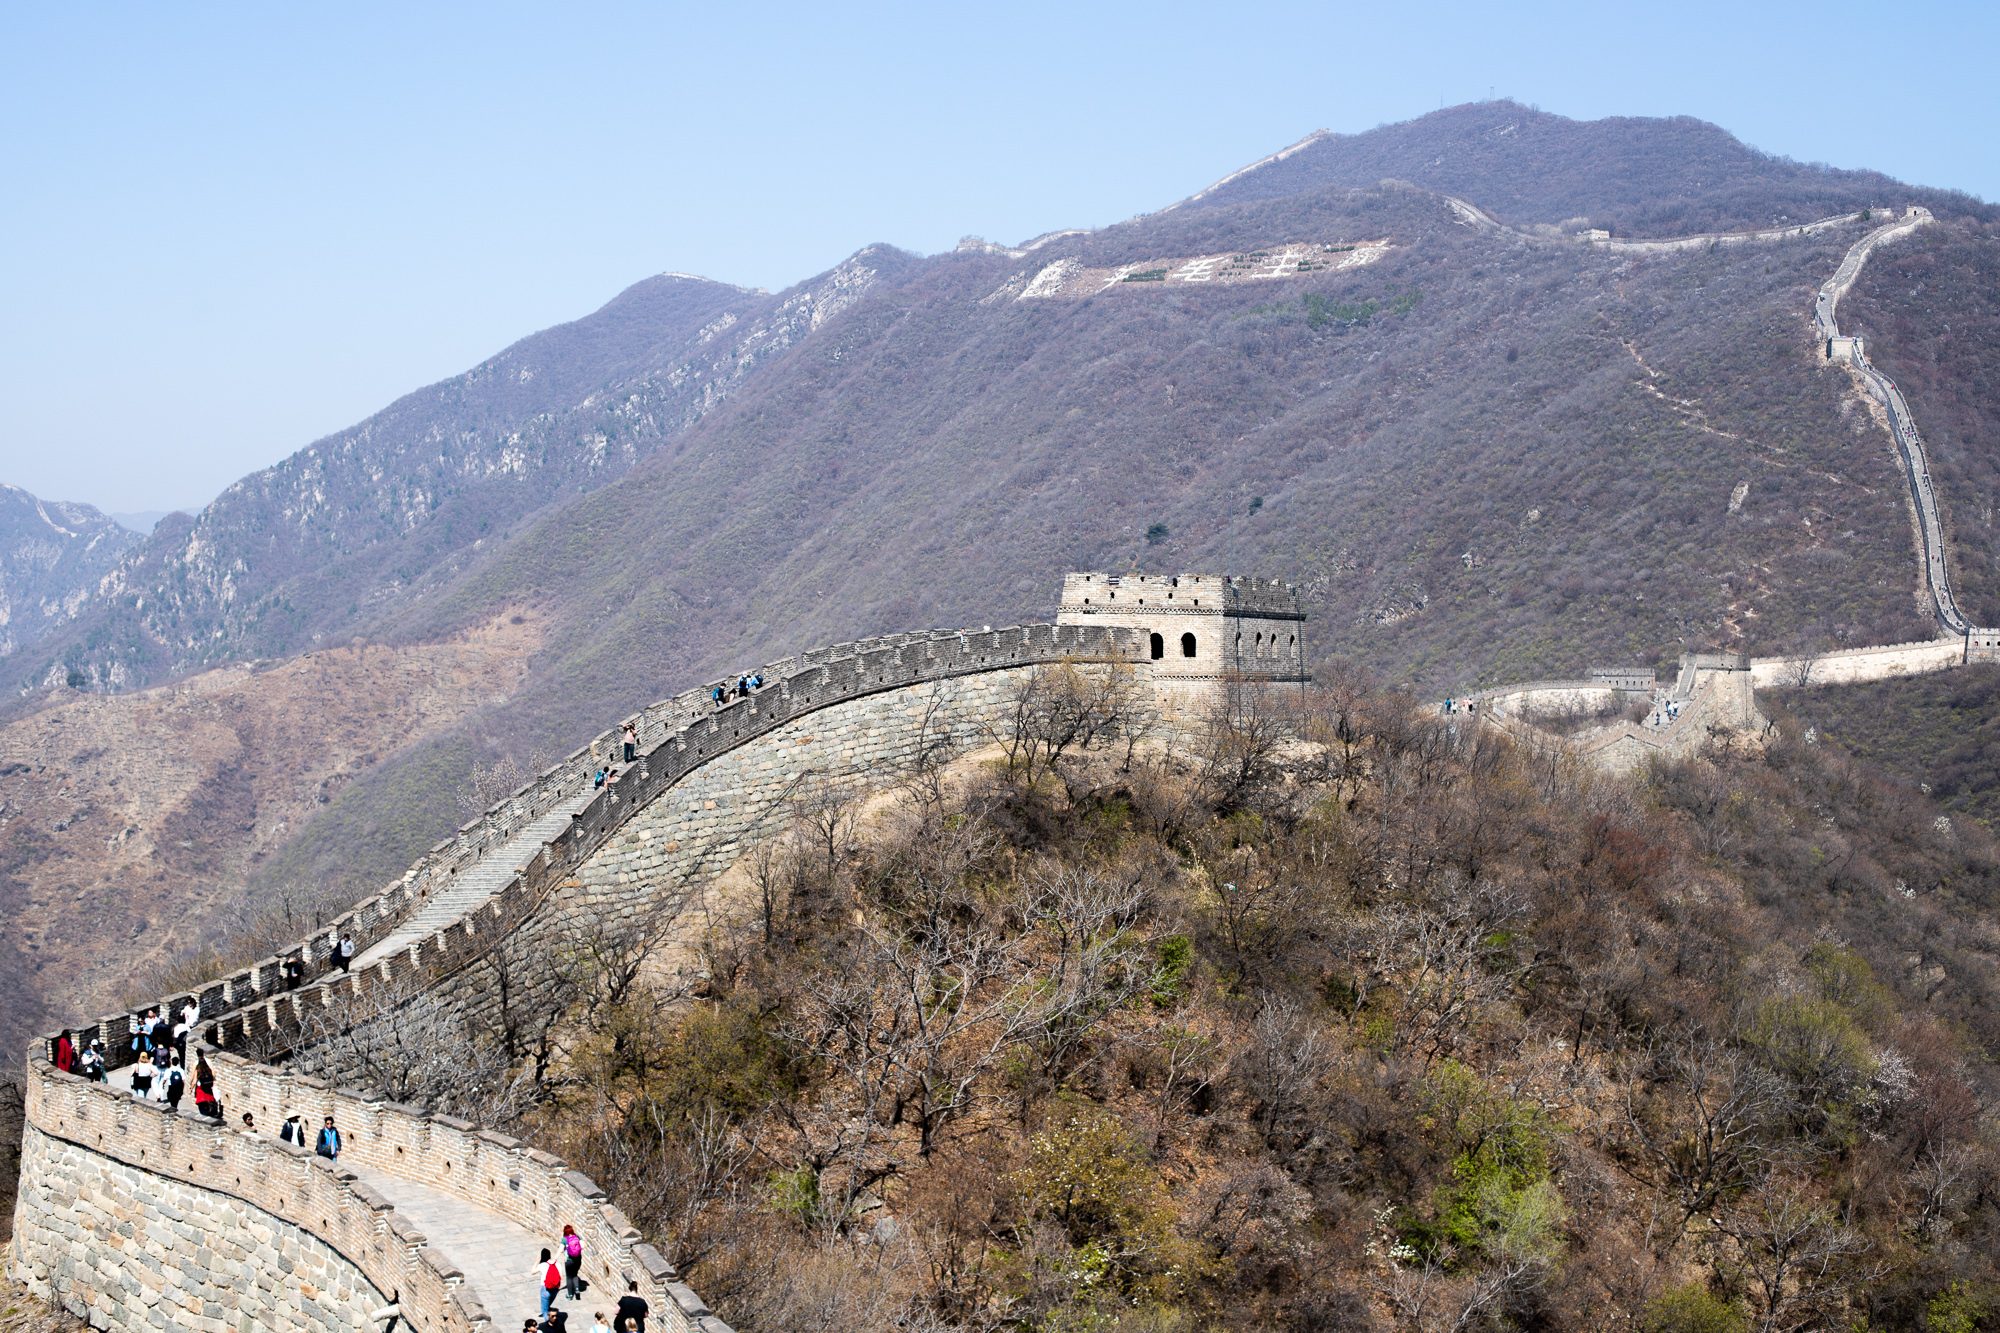 The Great Wall, Climbing the Great Wall of China, Great Wall Beijing, what to do in Beijing, viator, best way to see the great wall, what to do in china, wonders of the world, travel bucket list